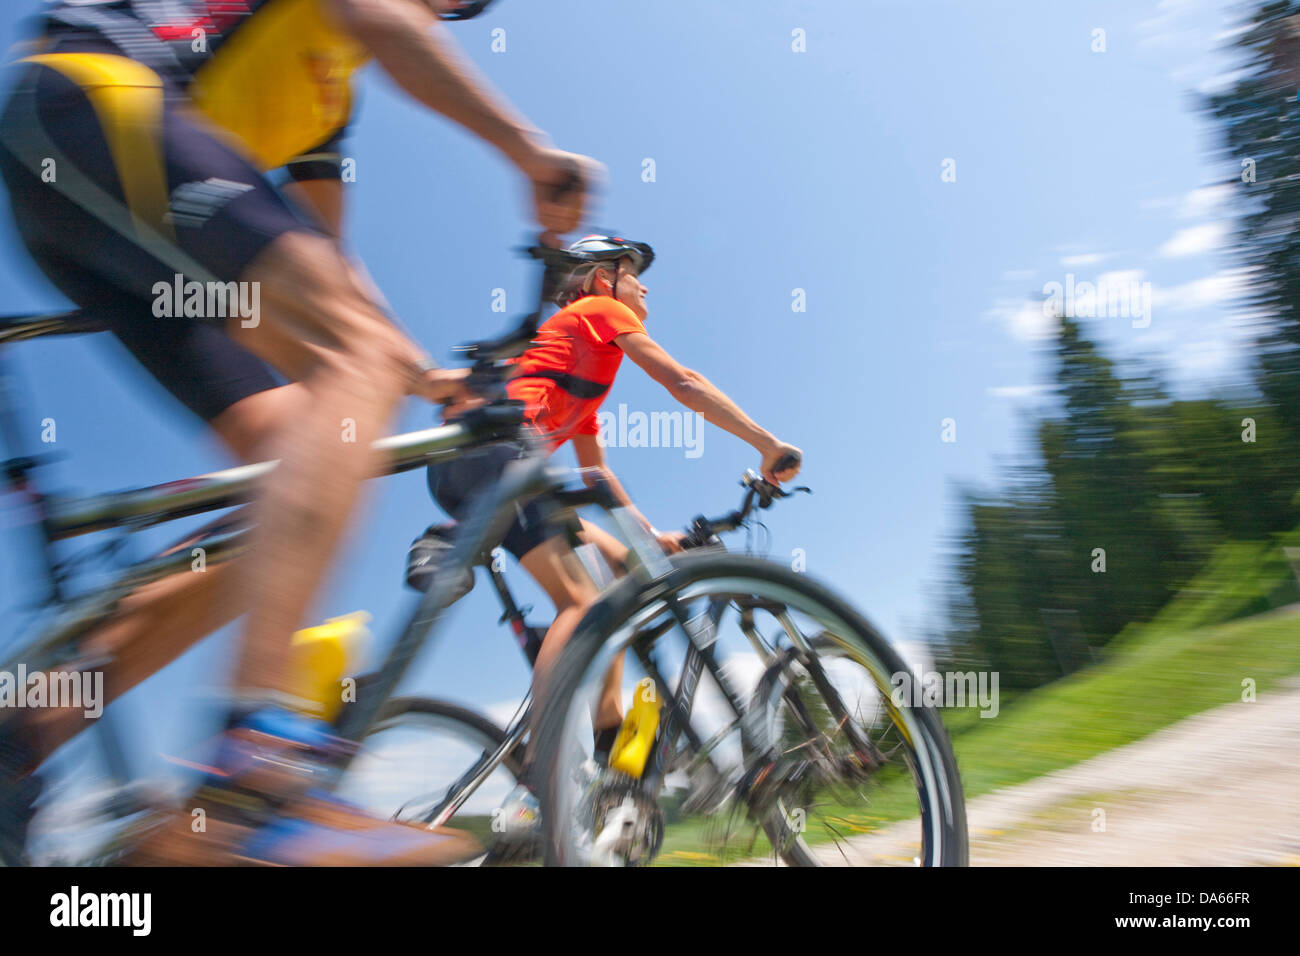 Bicycle tour, mountain bikes, Parc vaudoise jurassienne, Val de Joux, bicycle, bicycles, bike, riding a bicycle, tourism, holida Stock Photo